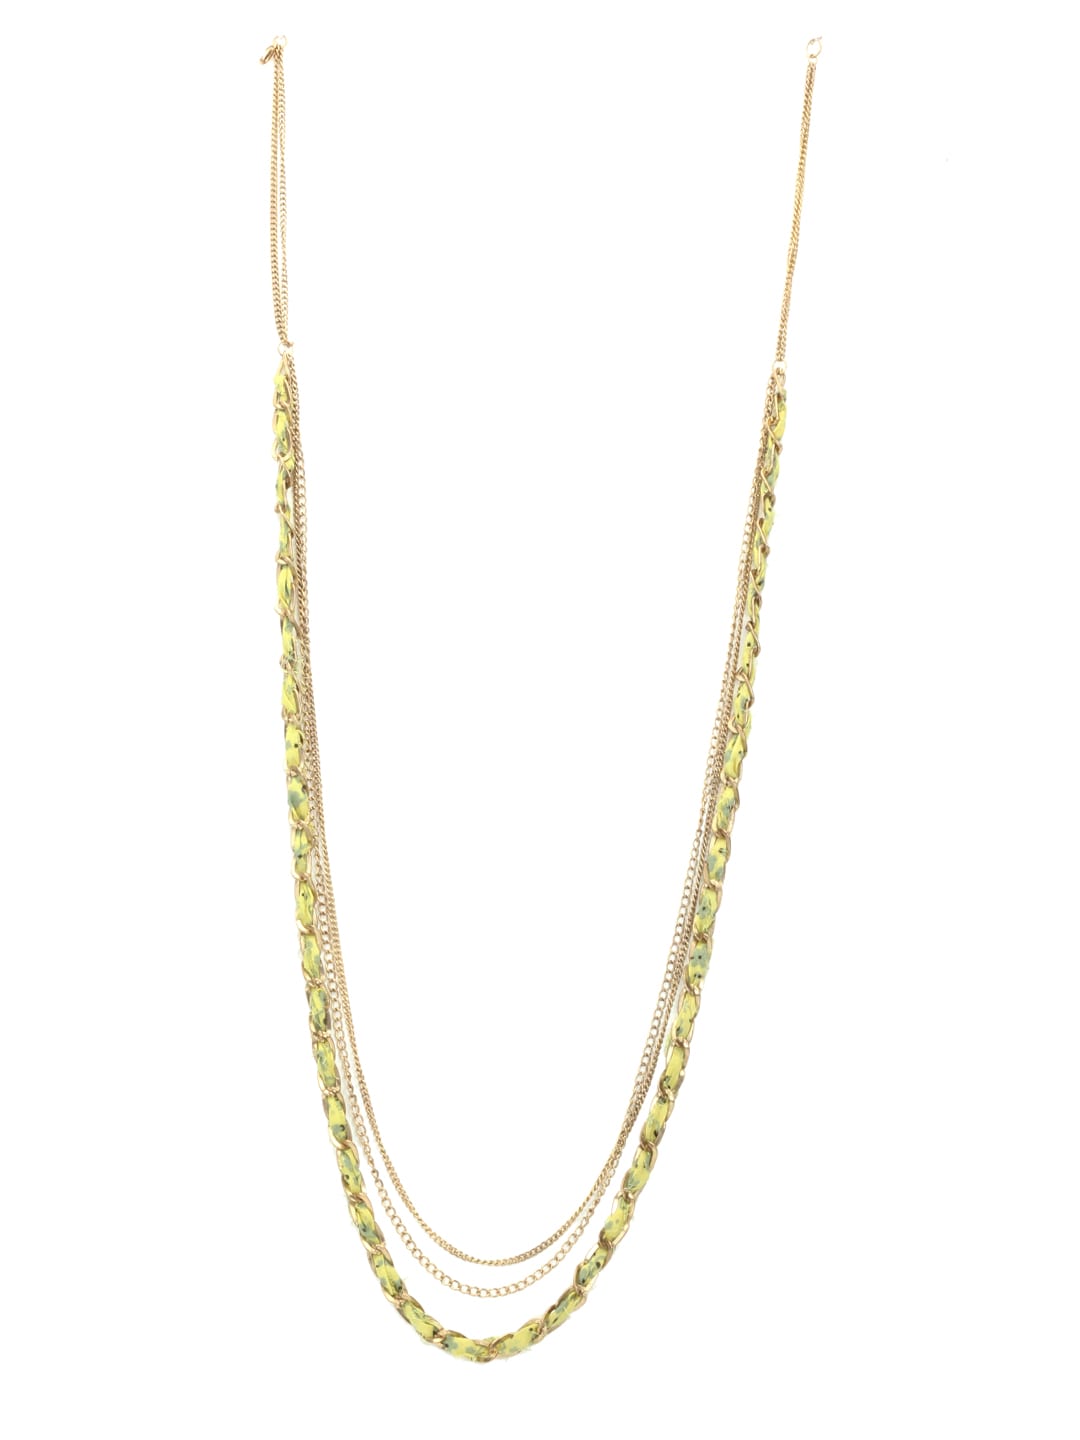 Femella Printed Fabric and Chain Necklace